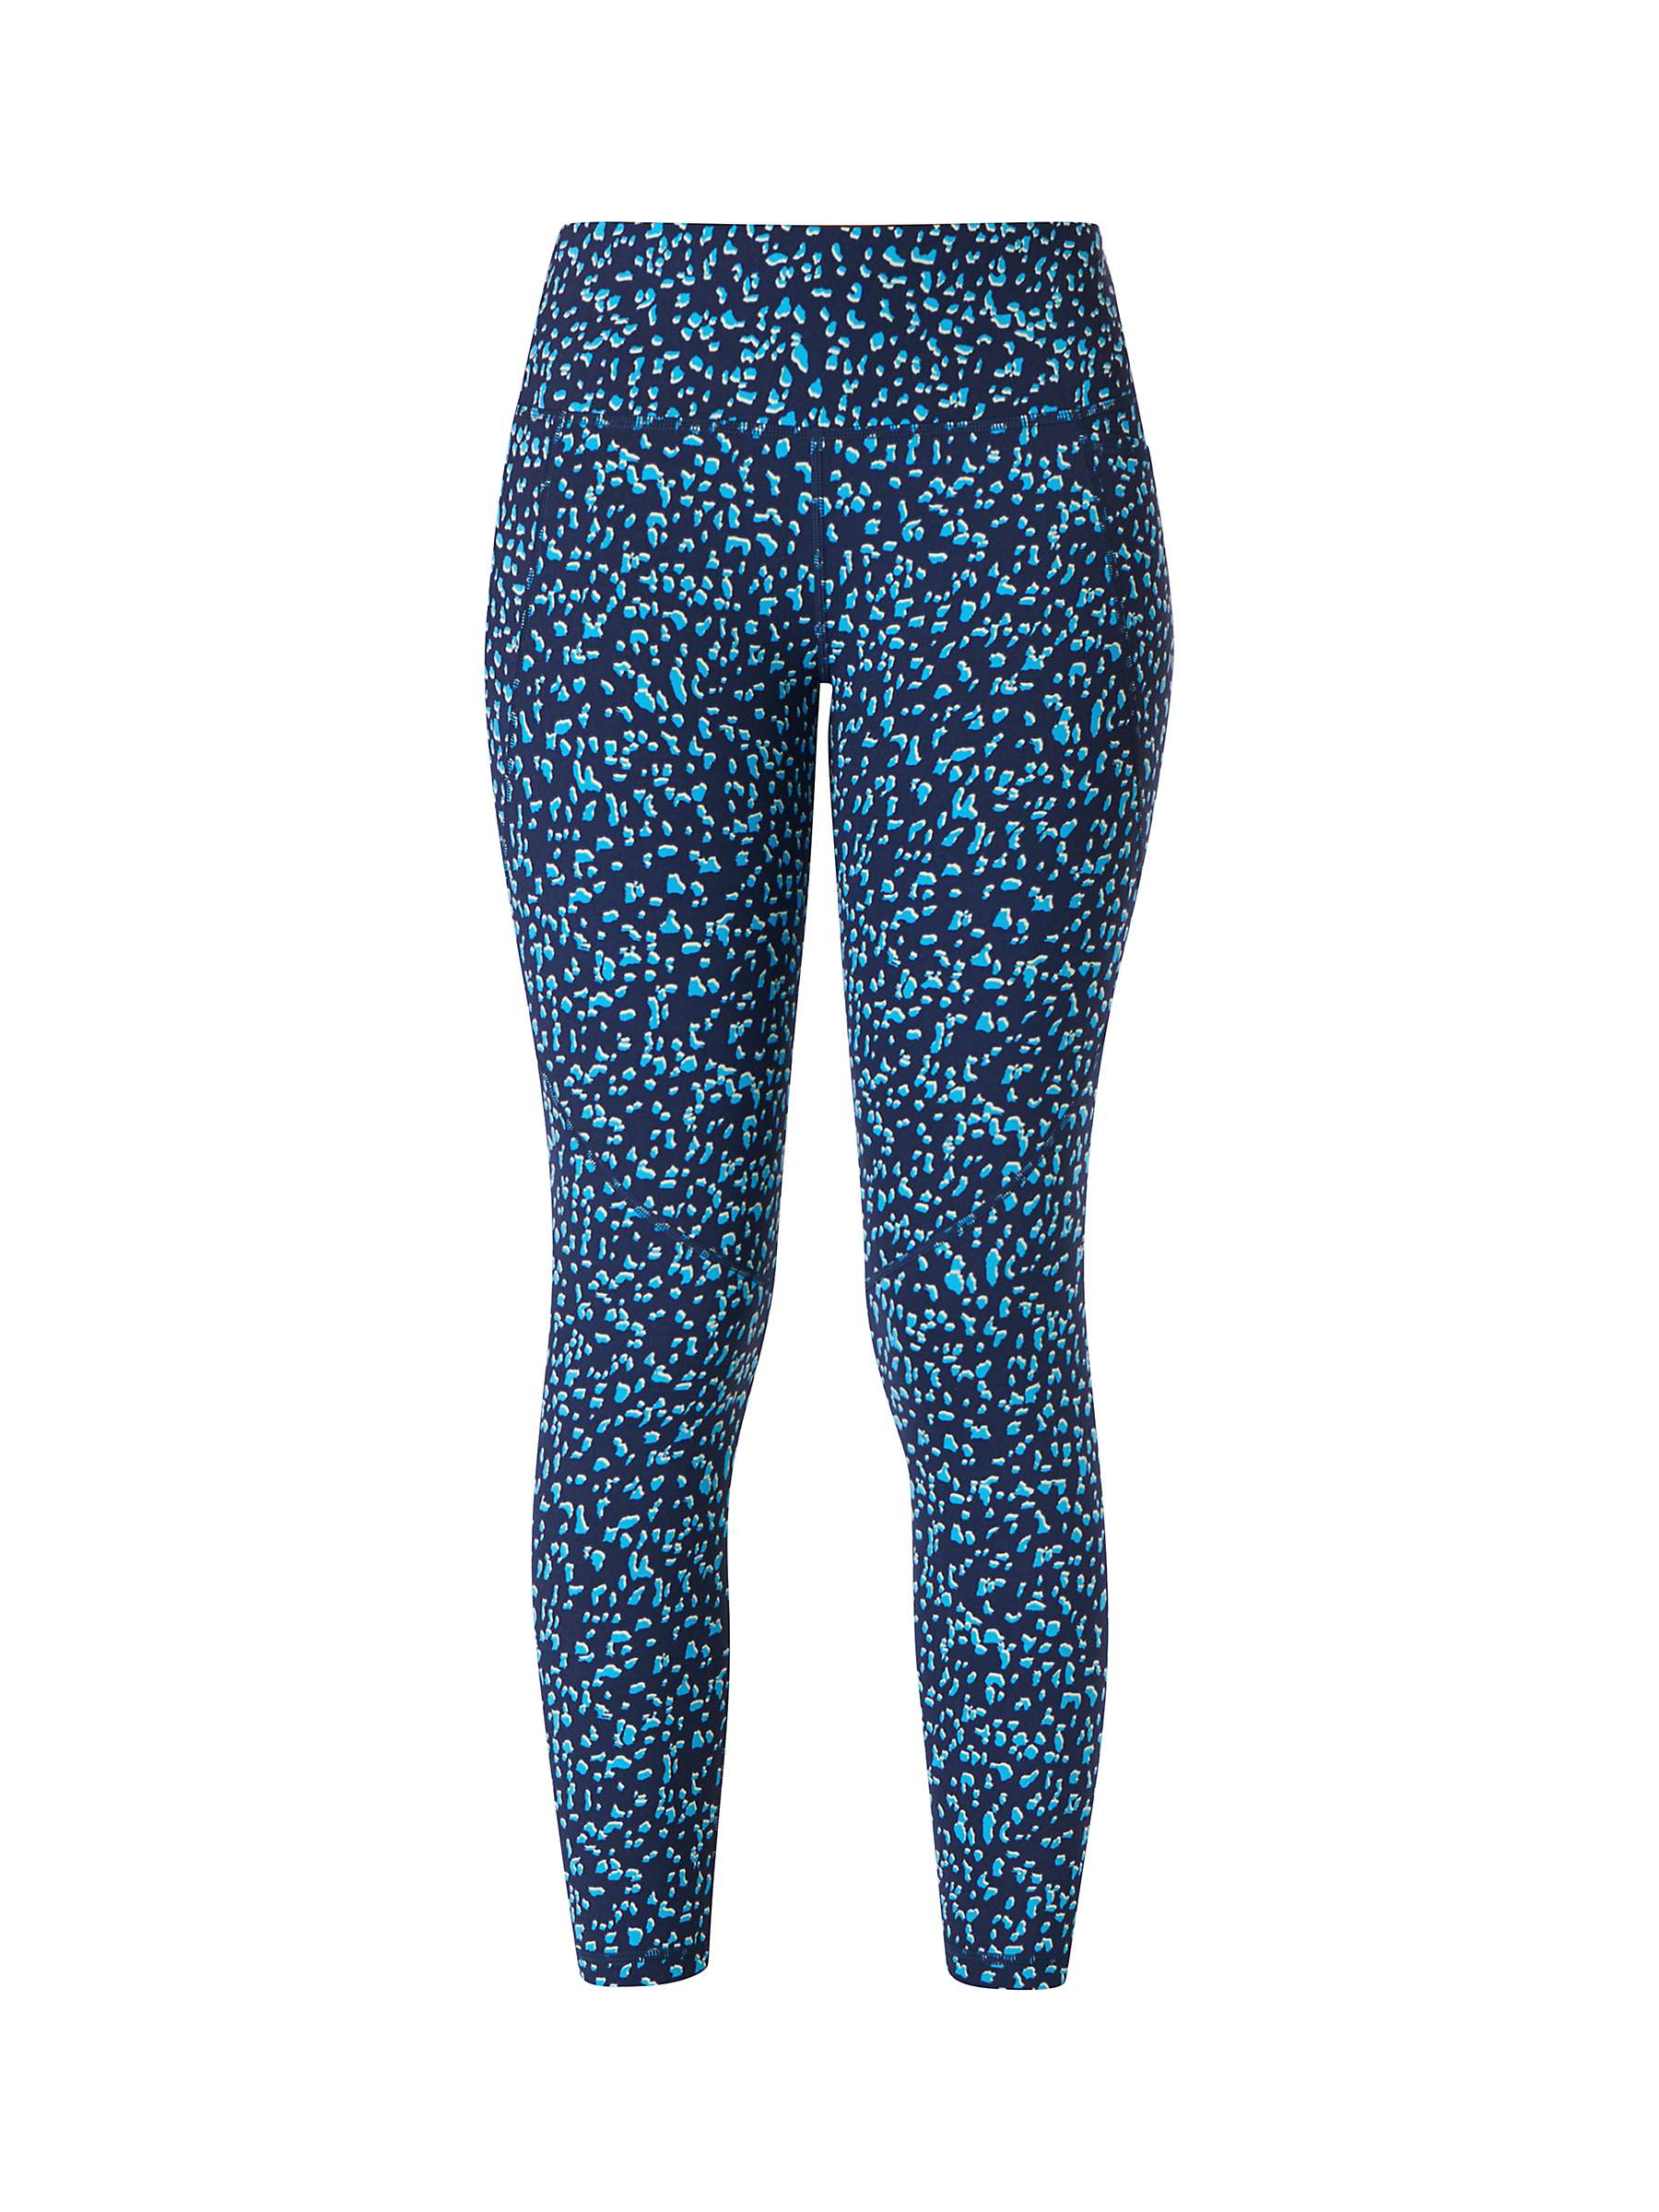 Sweaty Betty Power Workout Leggings, Blue Abstract at John Lewis & Partners